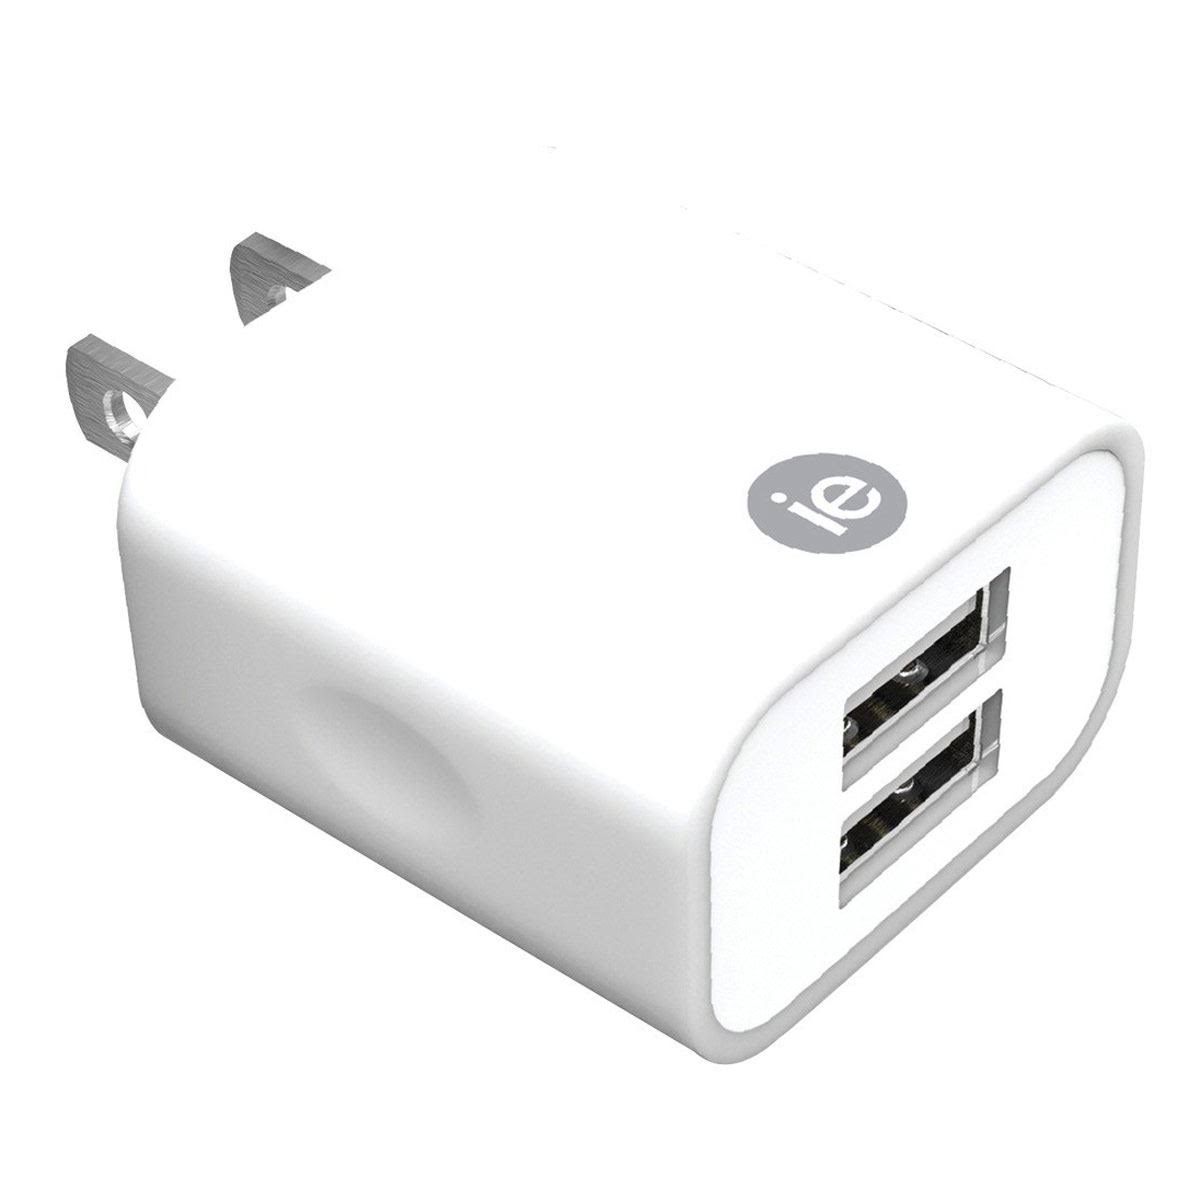 iEssentials IEN-AC22A-WT 2.4-Amp Dual USB Wall Charger (White)